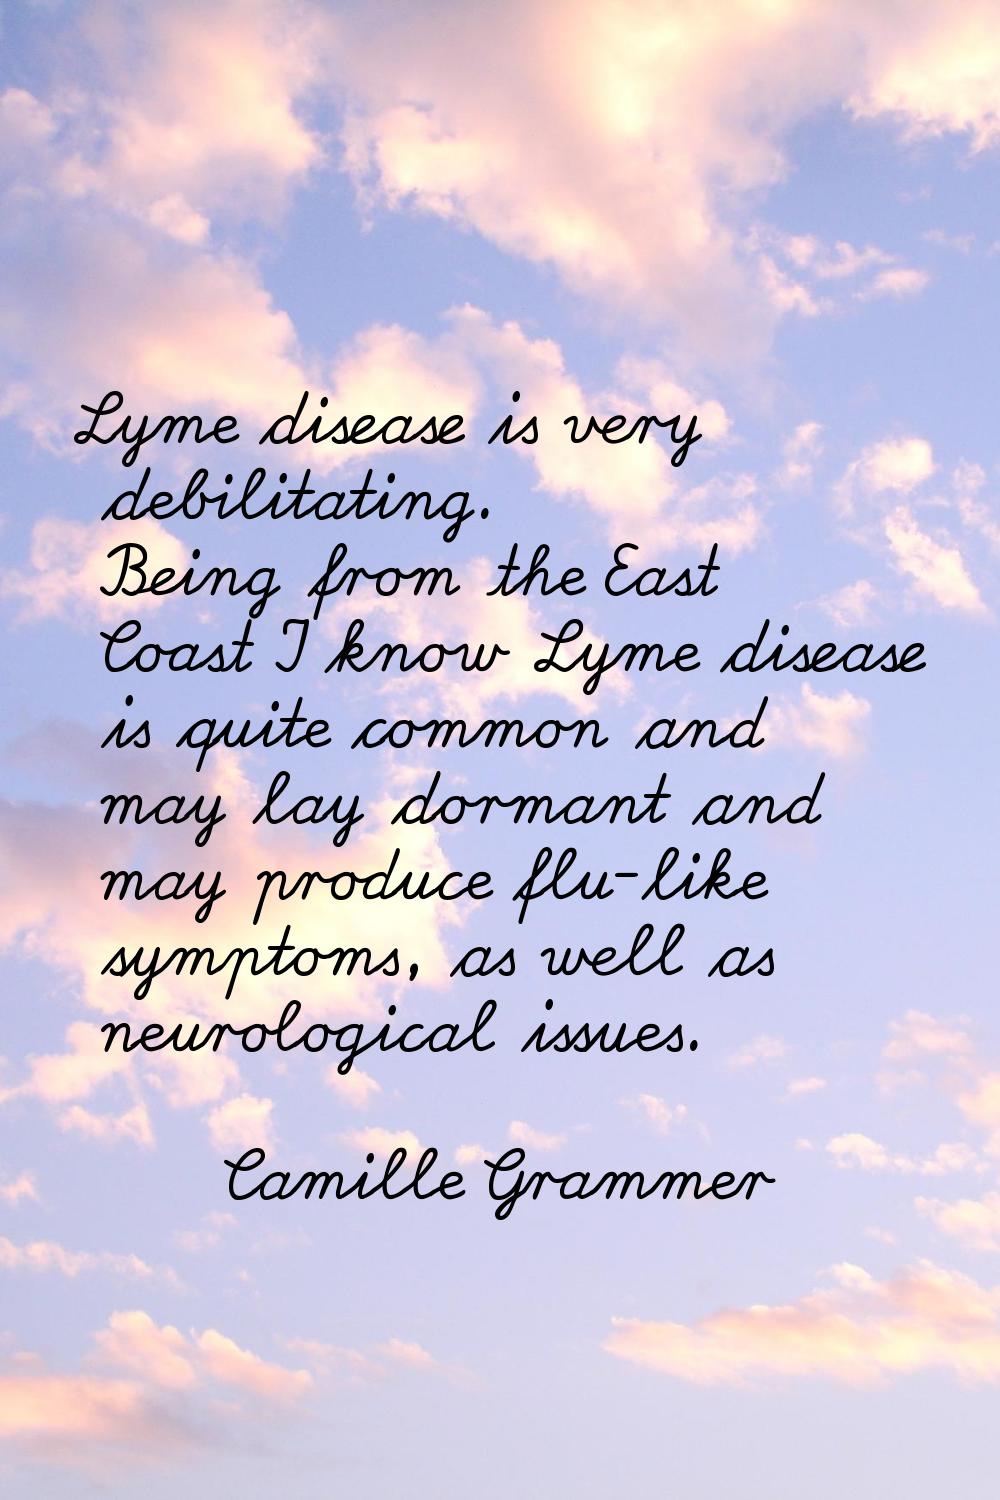 Lyme disease is very debilitating. Being from the East Coast I know Lyme disease is quite common an